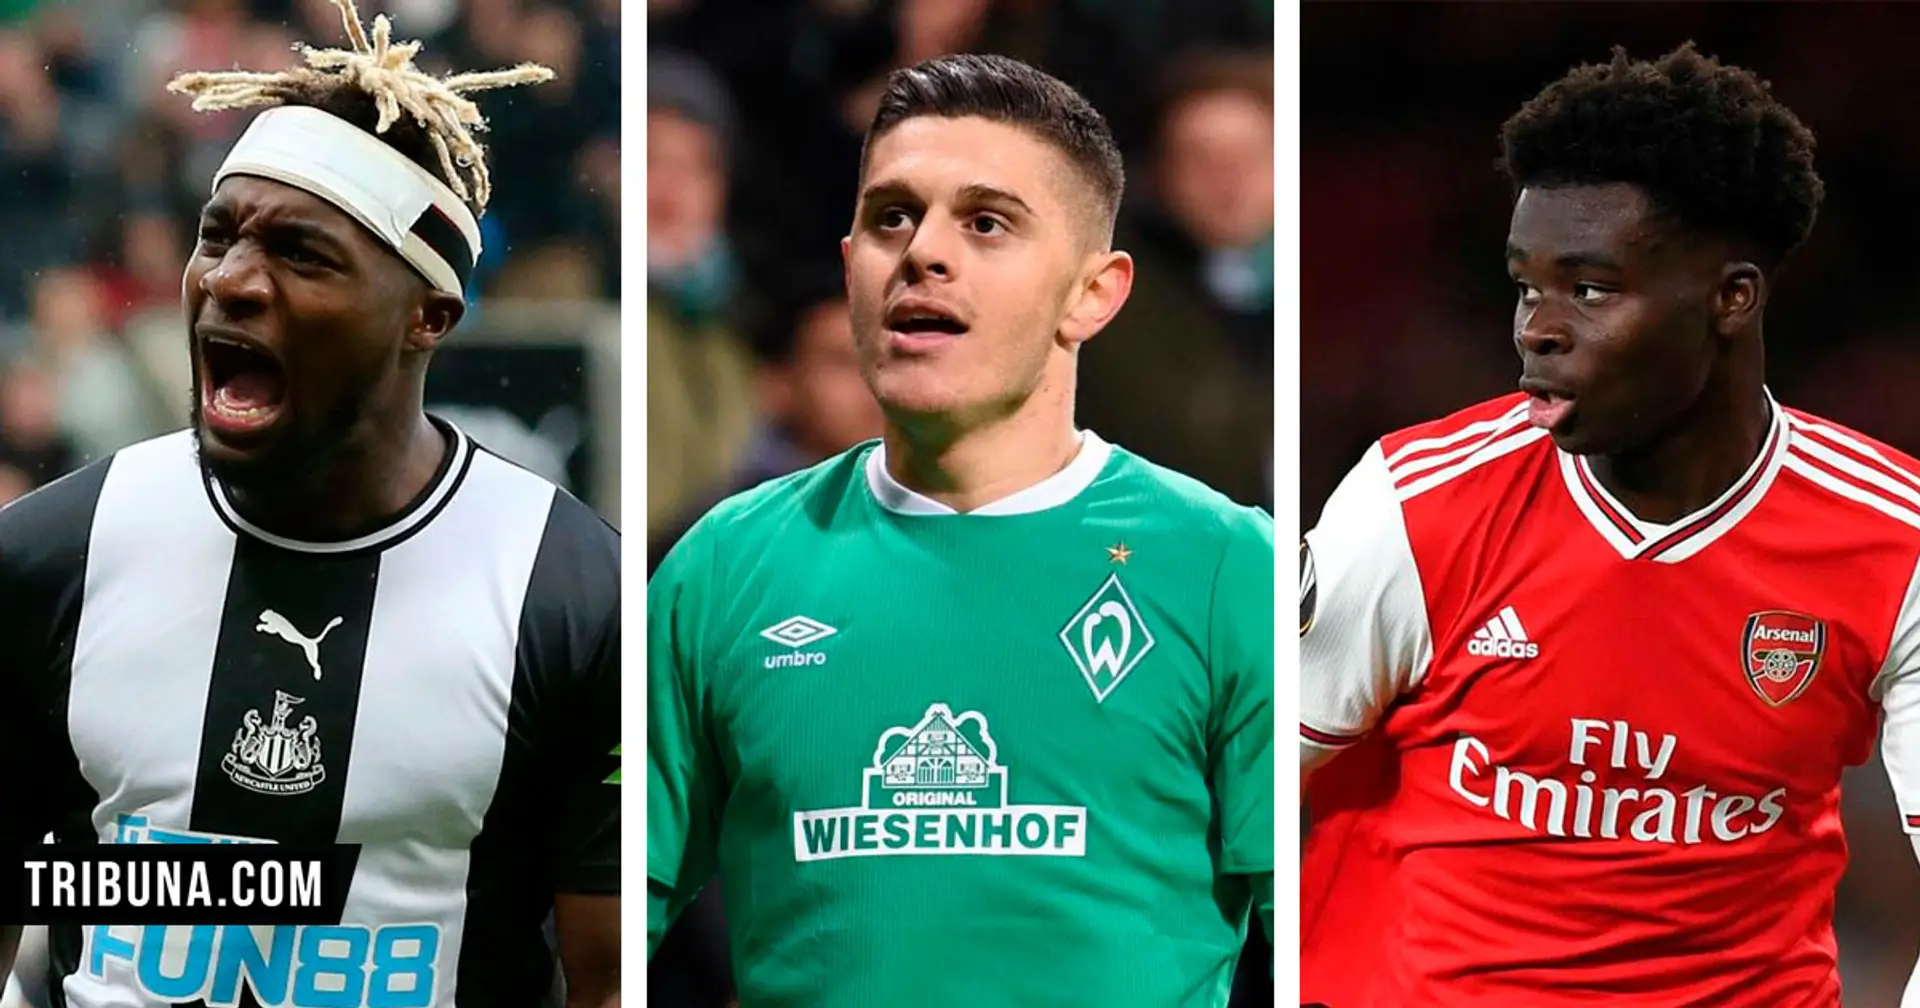 Magpies star, Werder talent, Arsenal youngster: LFC fan names 3 players to potentially succeed Mane